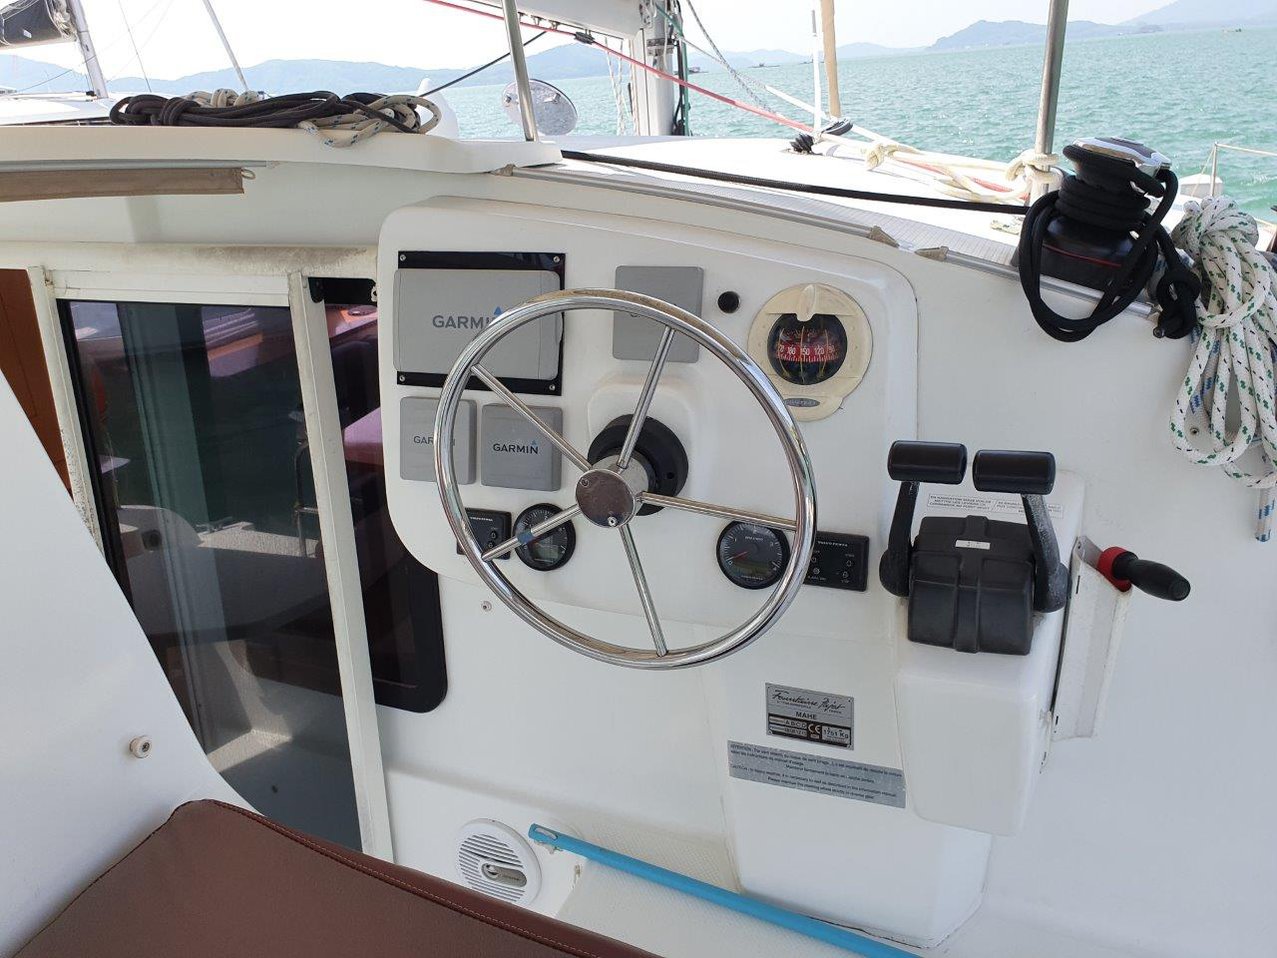 Mahe 36 - 3 cab. - Yacht Charter Queensland & Boat hire in Australia Queensland Whitsundays Coral Sea Marina 5